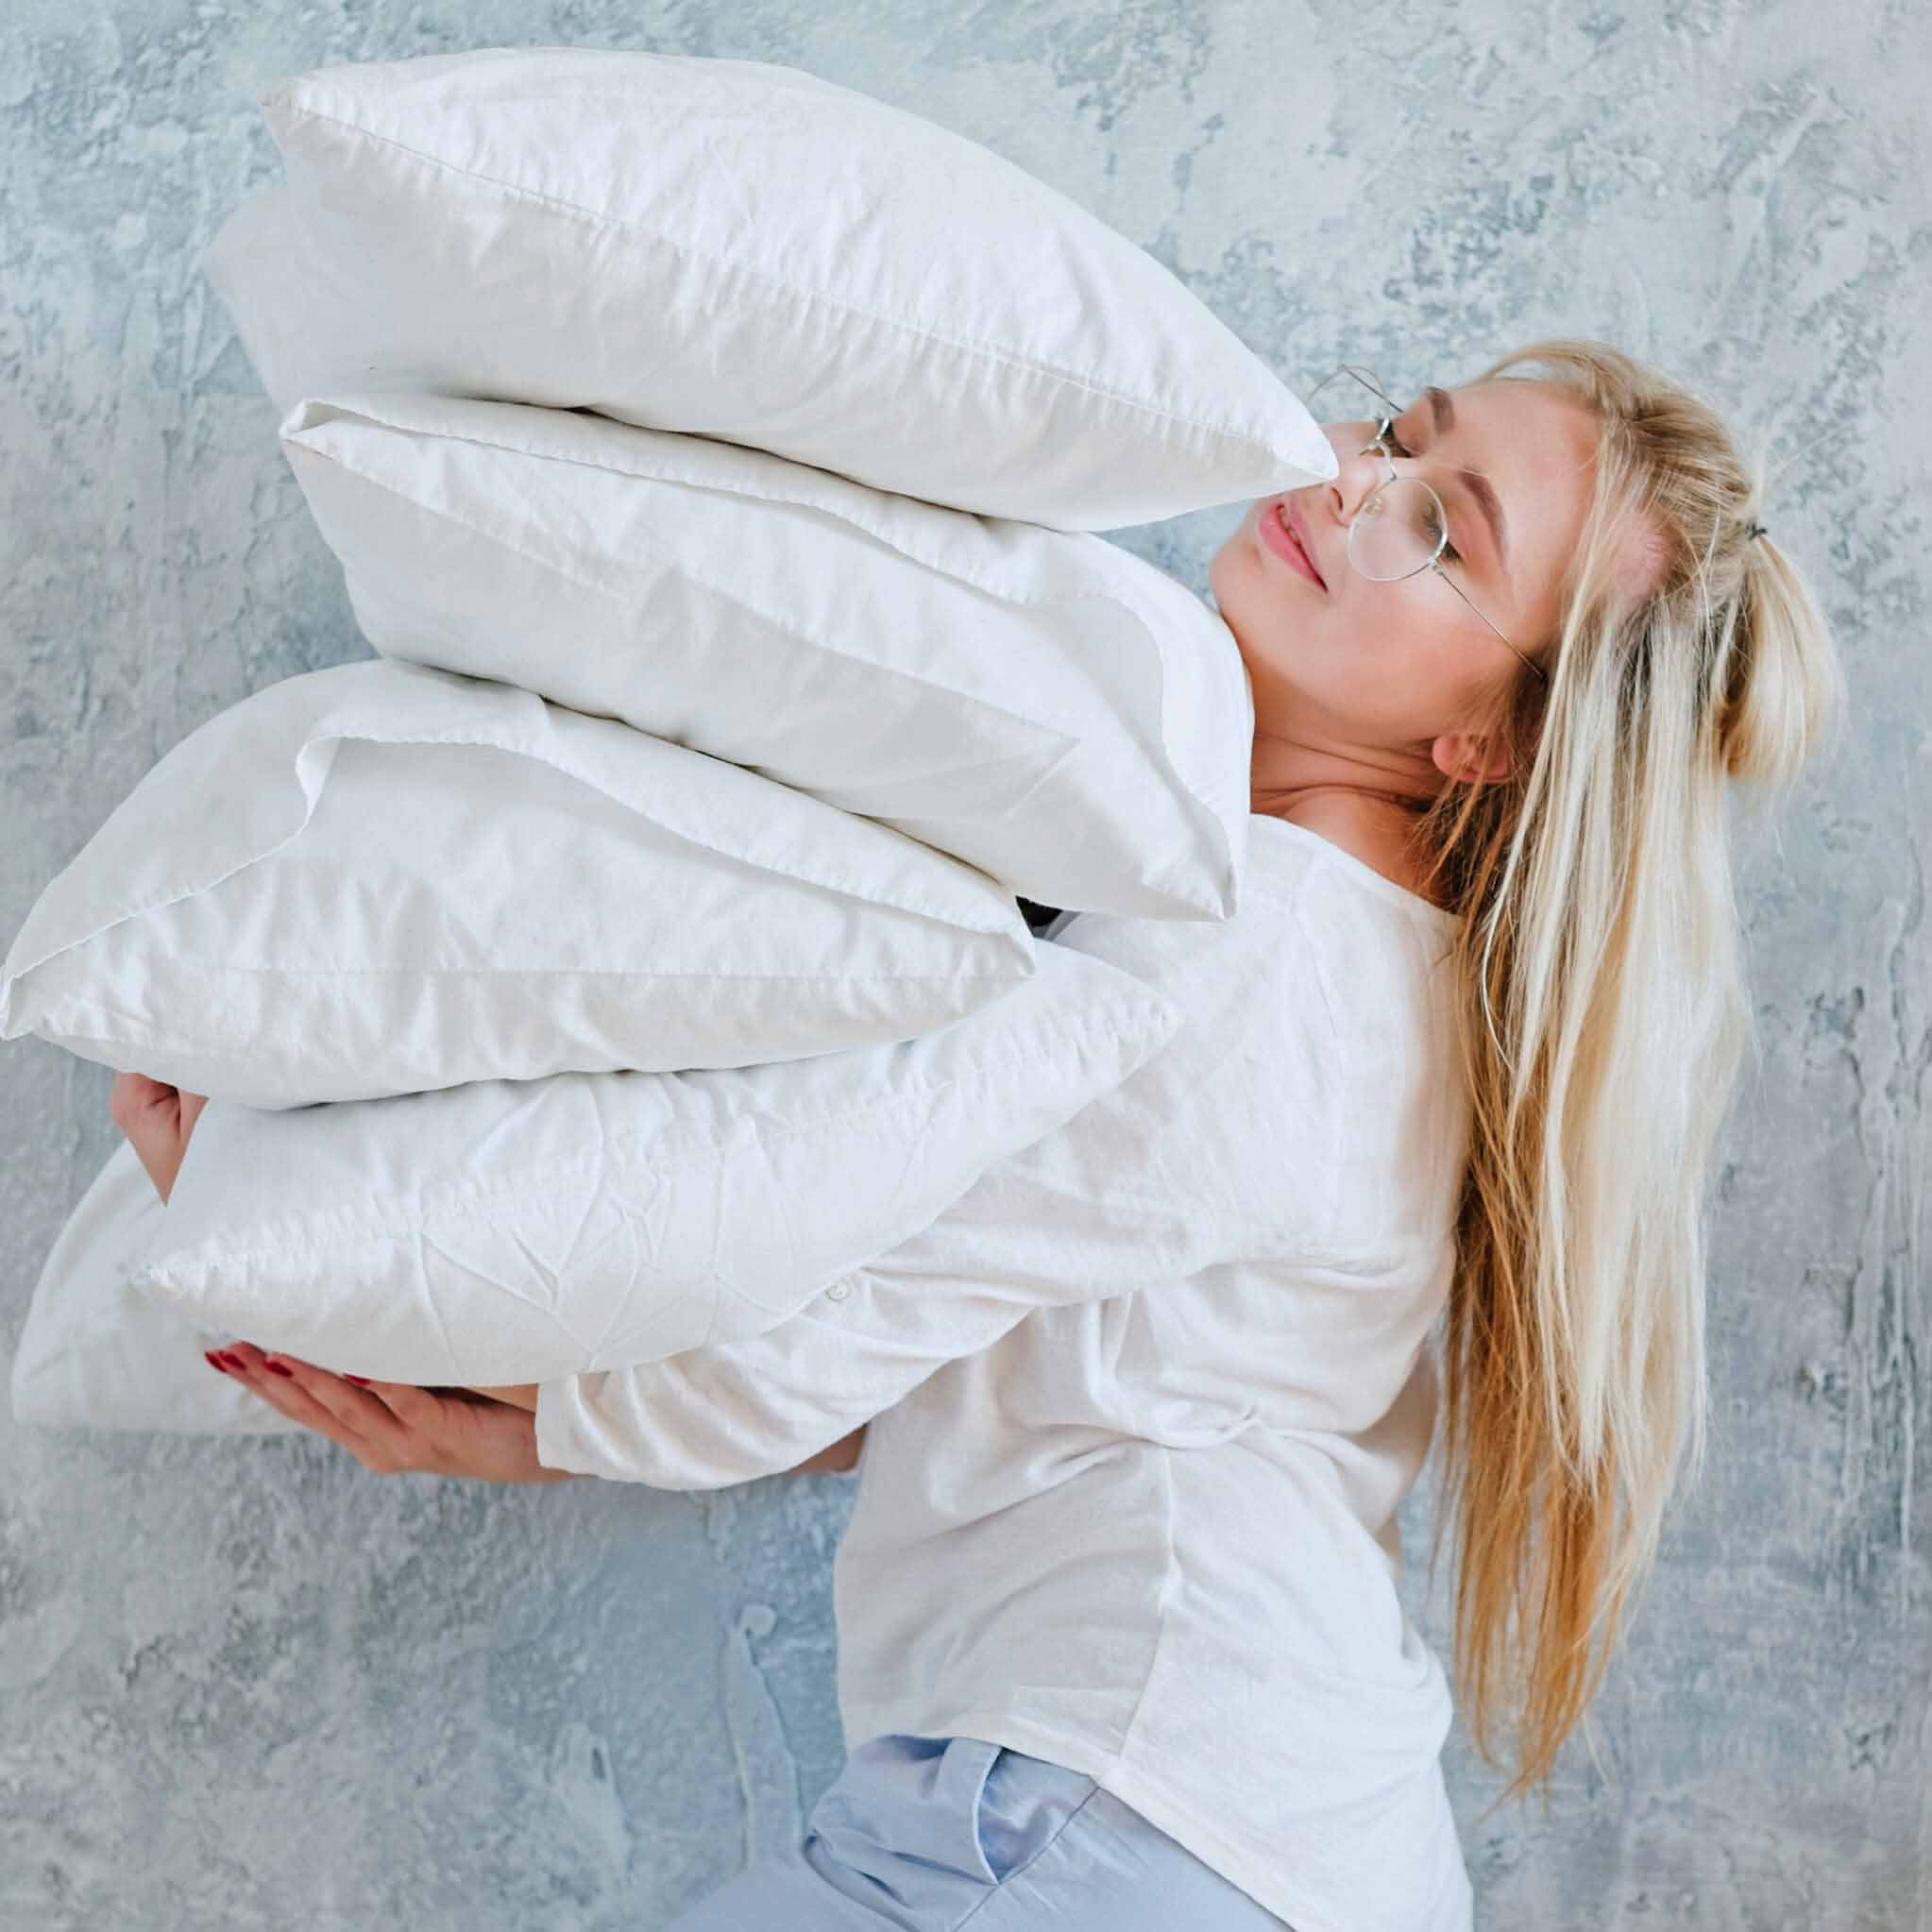 Our line of allergy relief bed pillows is designed for people suffering from allergies, asthma, eczema, and other dust-related allergies, or for families who value a healthier way of living. Clean pillows are a must for allergy and asthma sufferers.